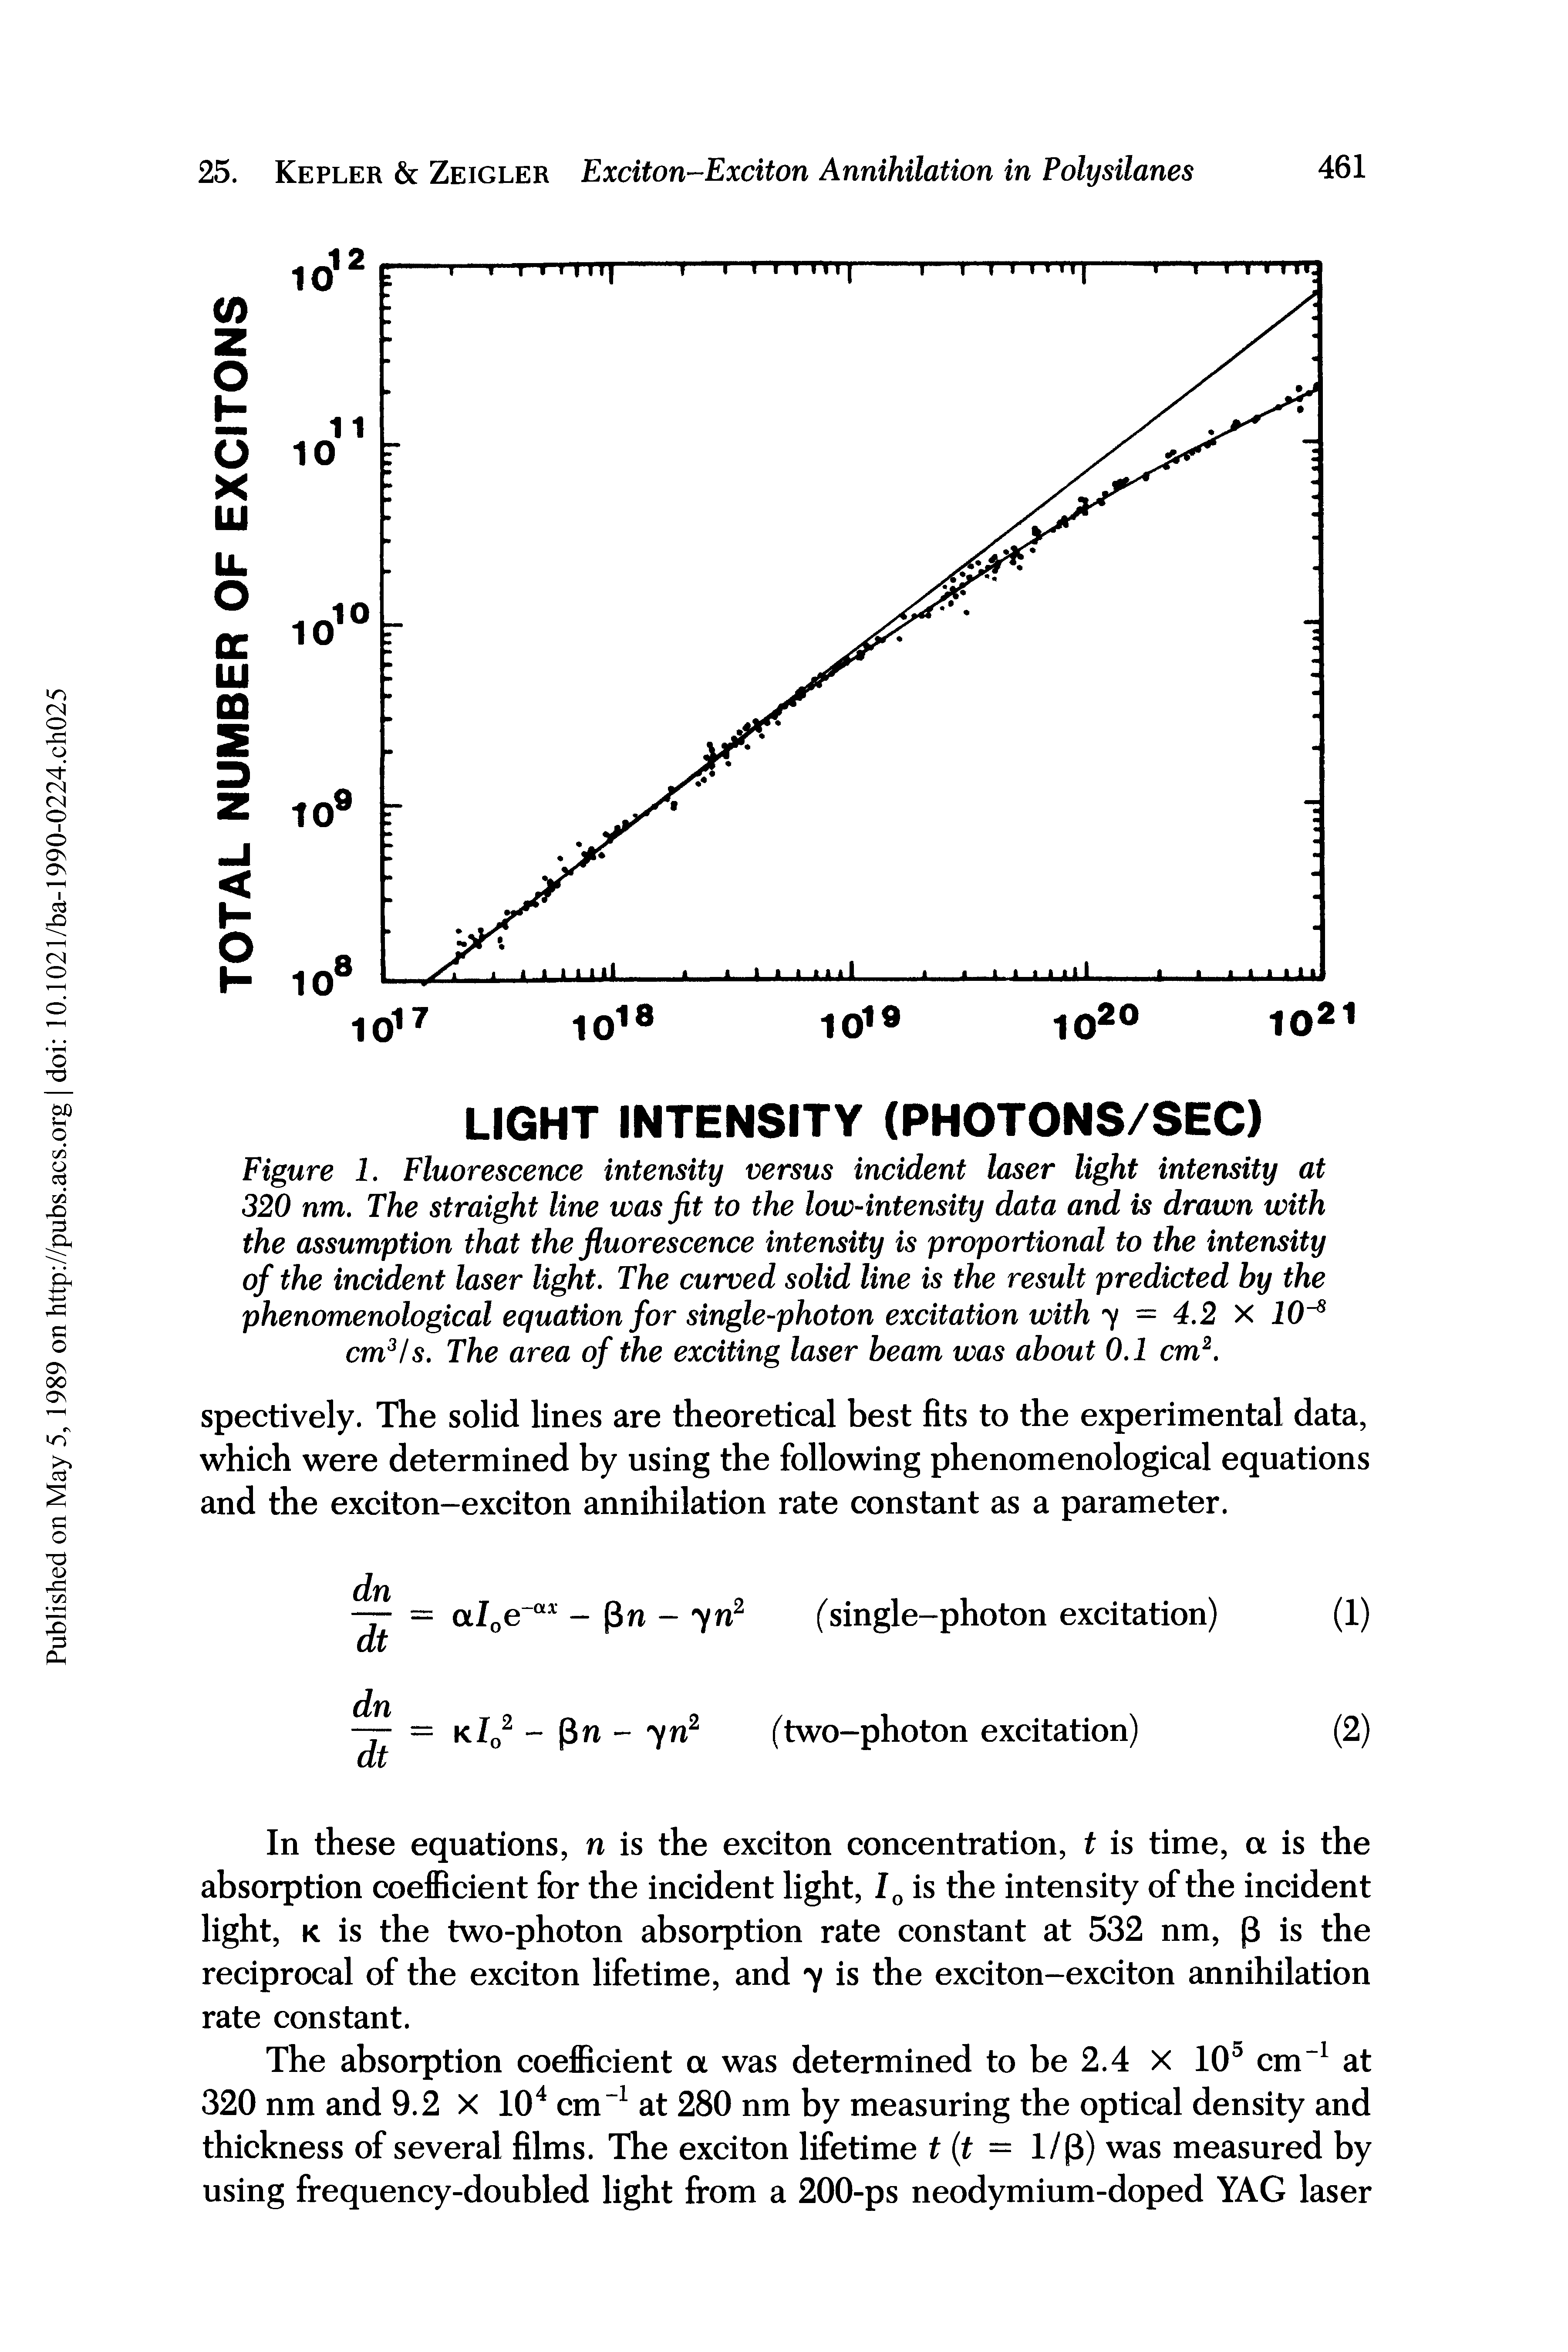 Figure 1. Fluorescence intensity versus incident laser light intensity at 320 nm. The straight line was fit to the low-intensity data and is drawn with the assumption that the fluorescence intensity is proportional to the intensity of the incident laser light. The curved solid line is the result predicted by the phenomenological equation for single-photon excitation with y = 4.2 X 10 cm ls. The area of the exciting laser beam was about 0.1 cm. ...